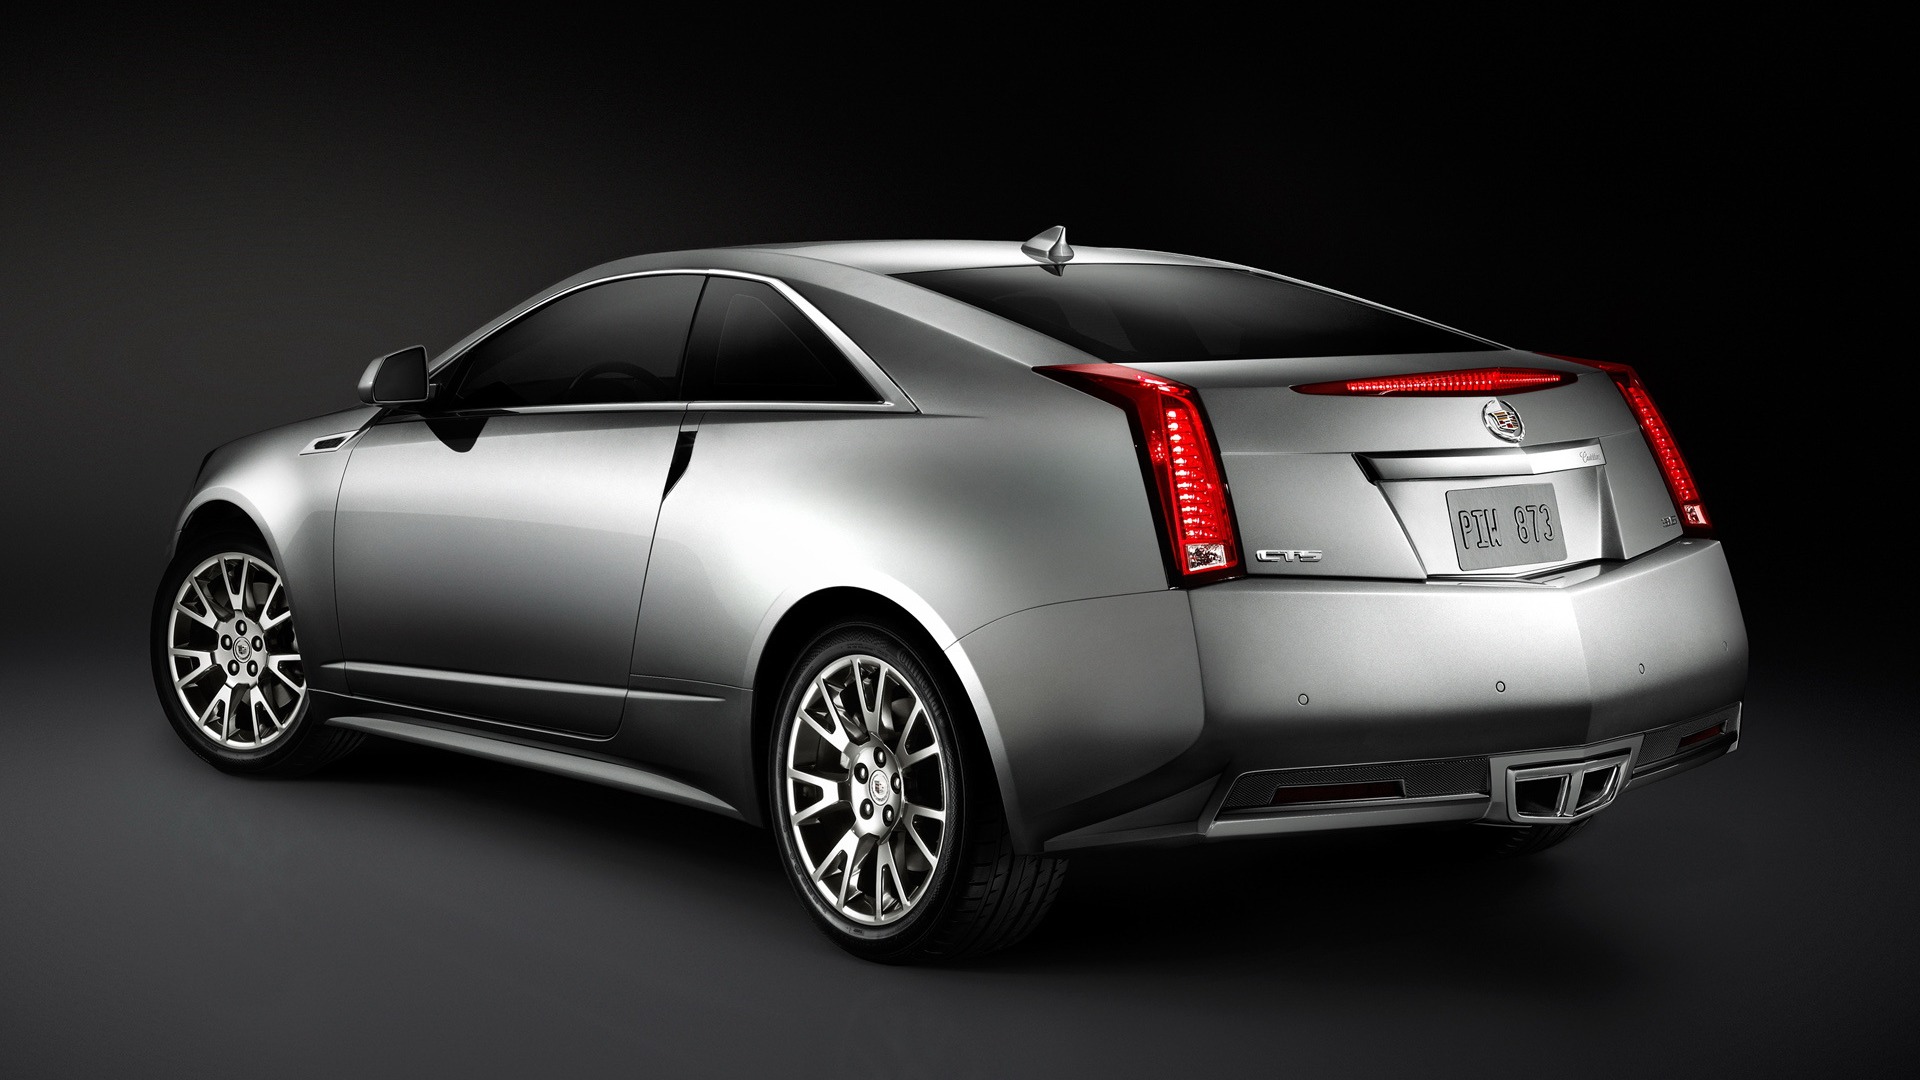 Cadillac CTS Coupe - 2011 HD Wallpaper #6 - 1920x1080